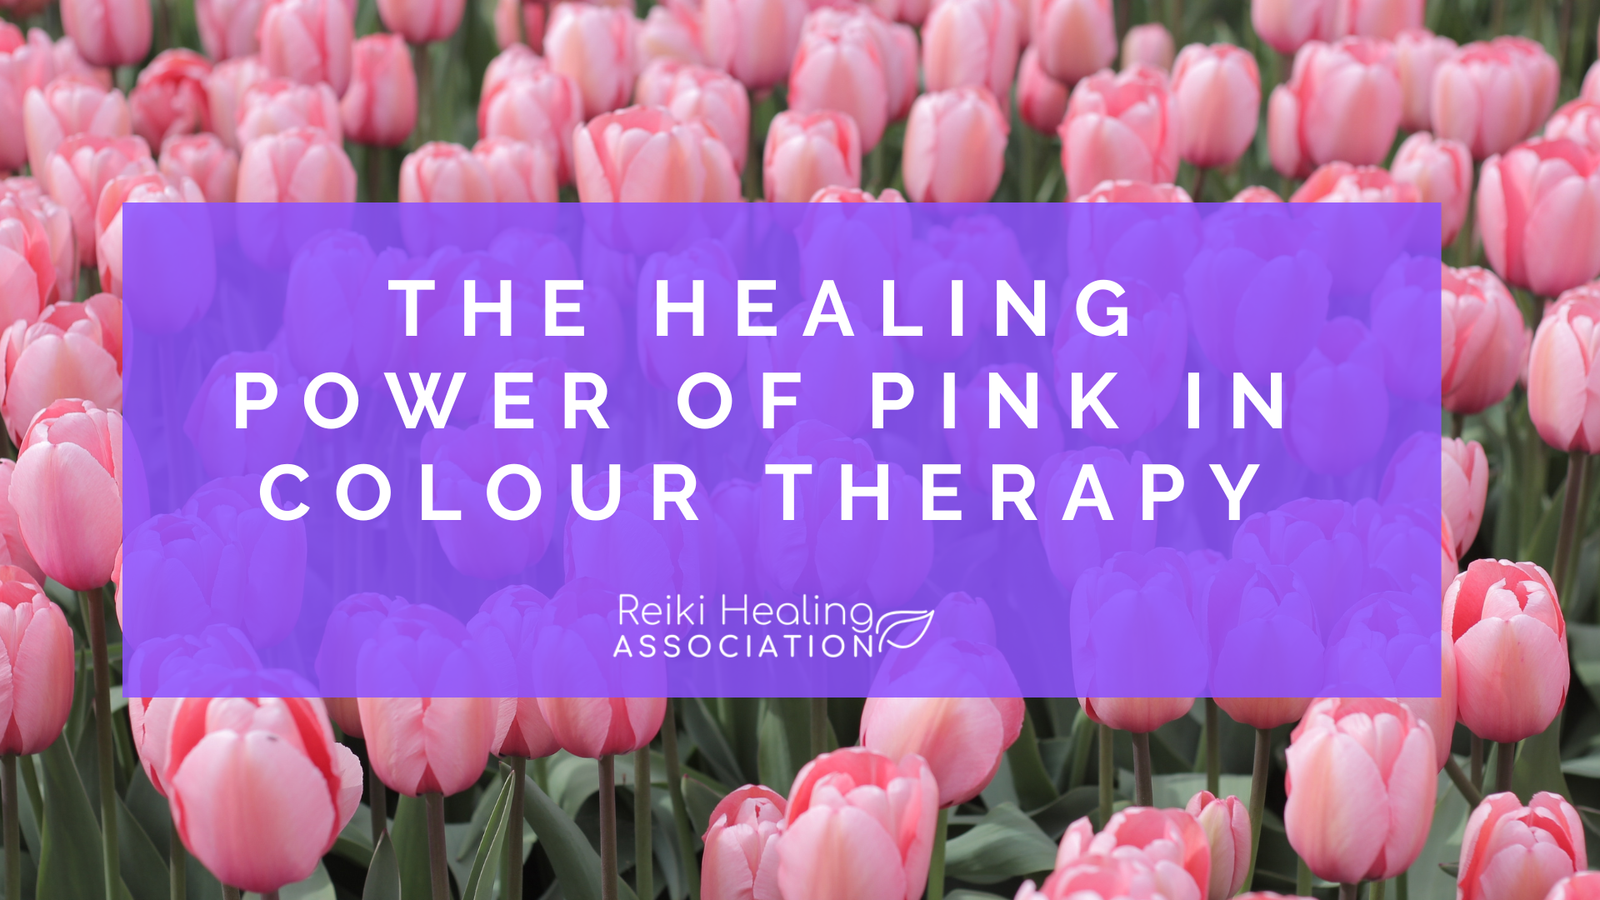 The Healing Power of Pink in Colour Therapy